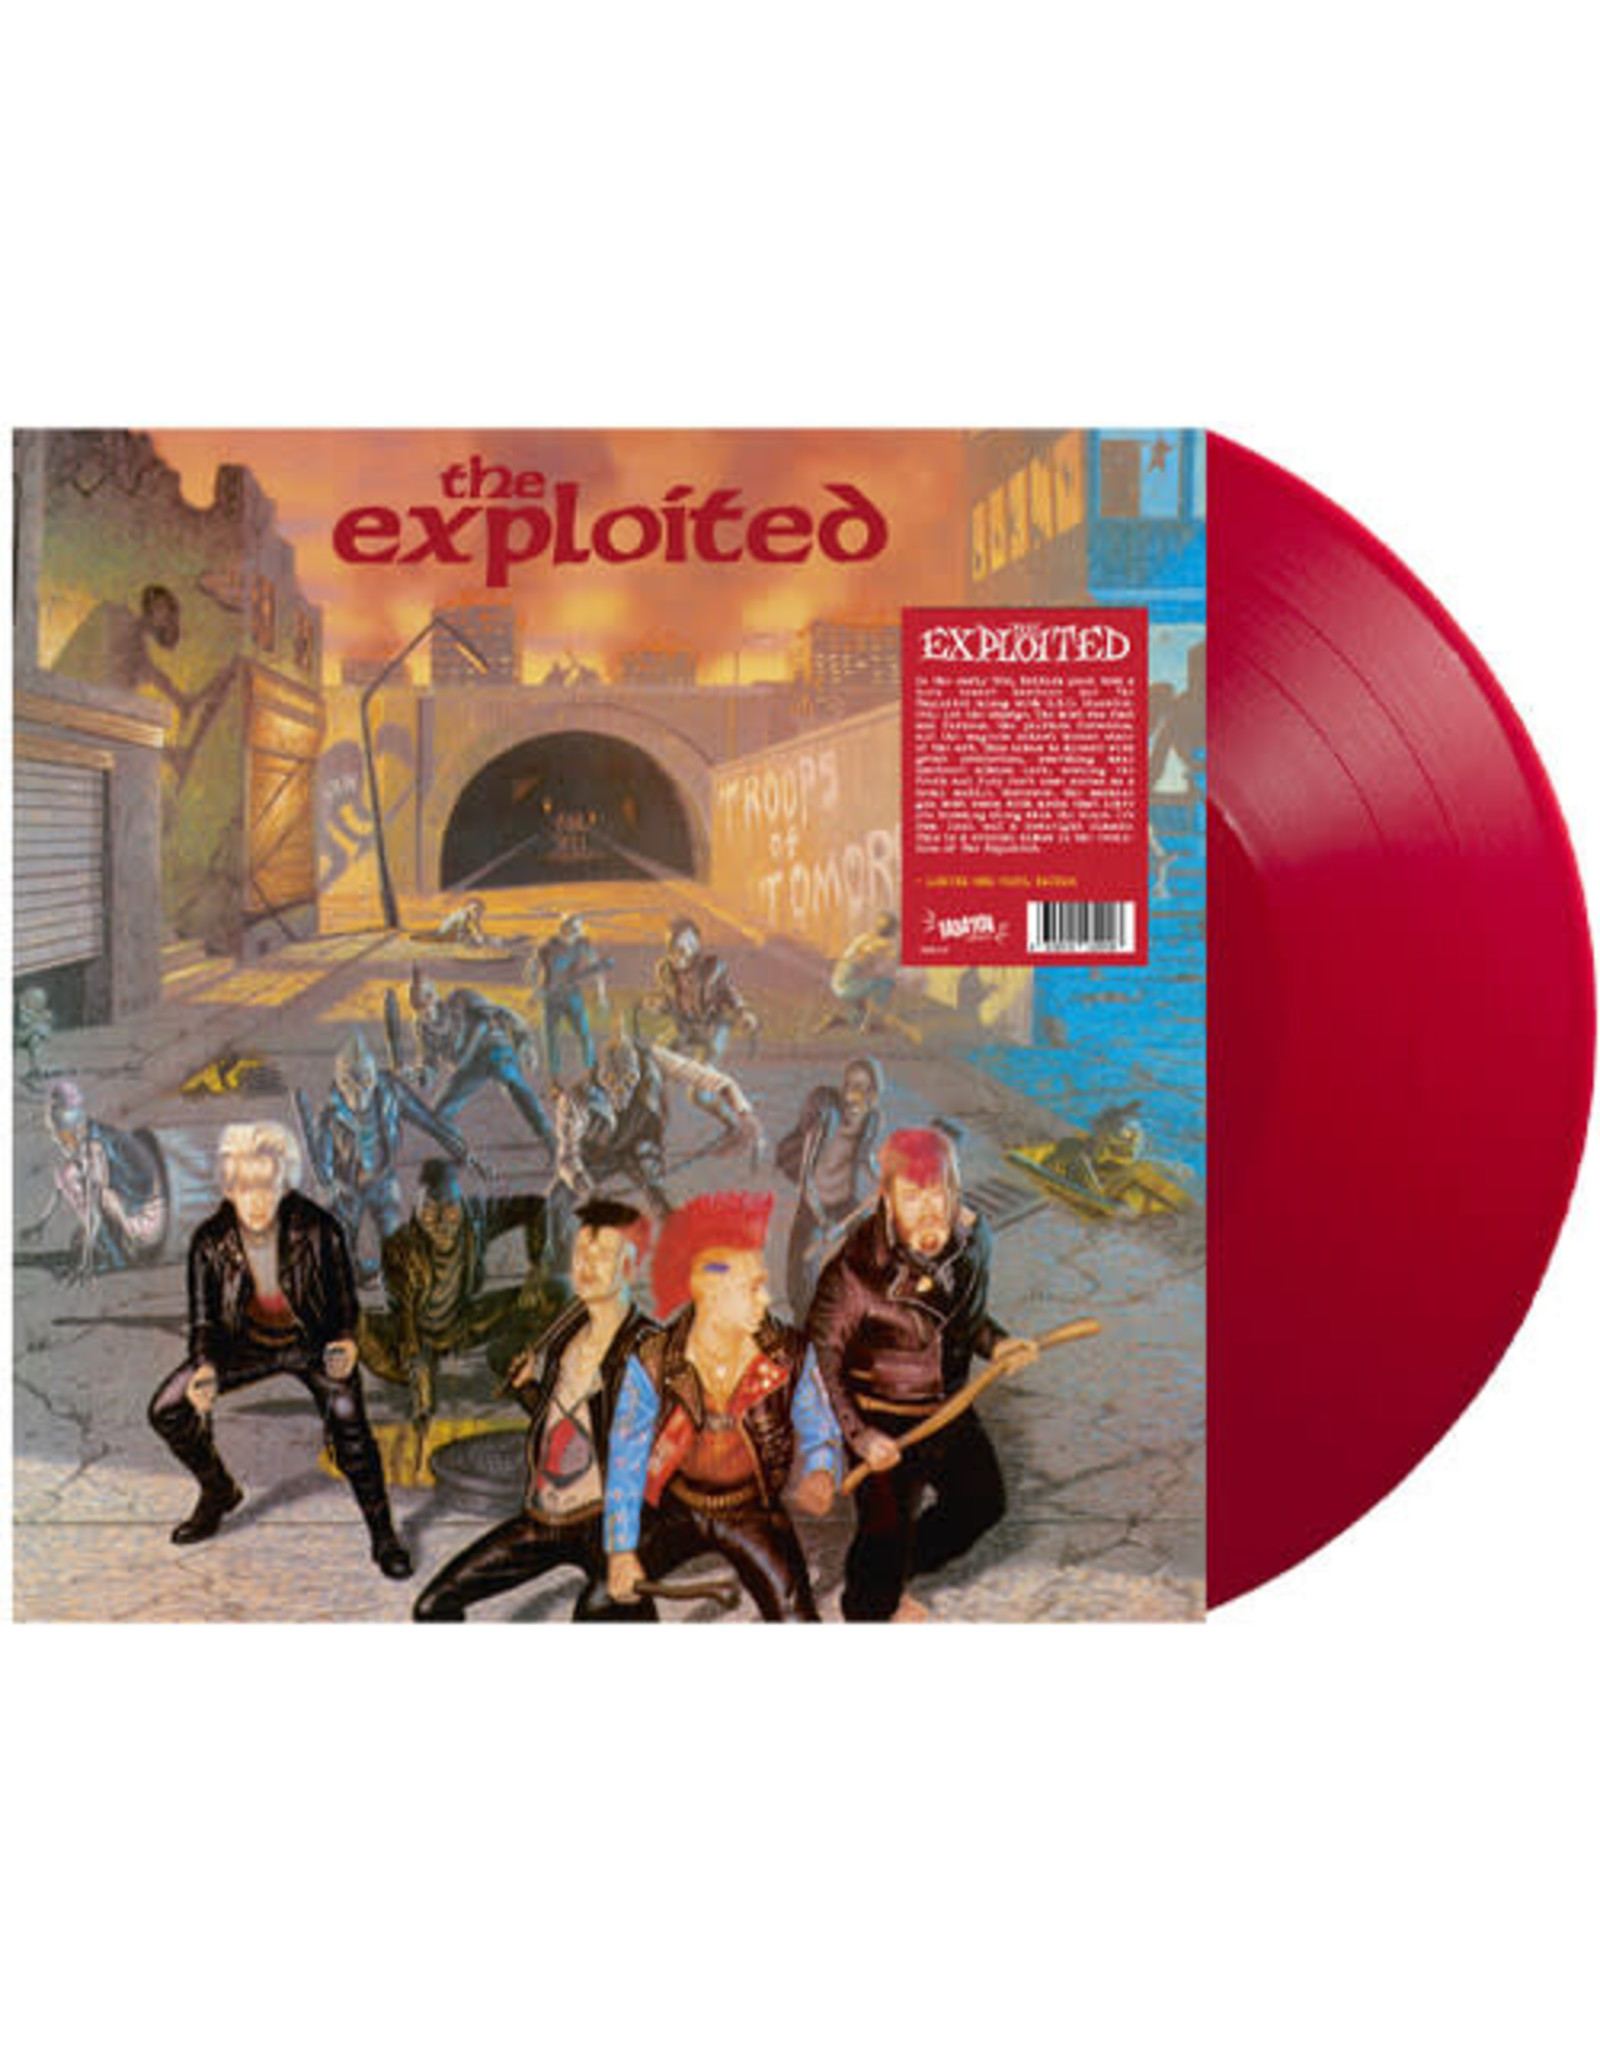 New Vinyl The Exploited - Troops Of Tomorrow (Red) LP